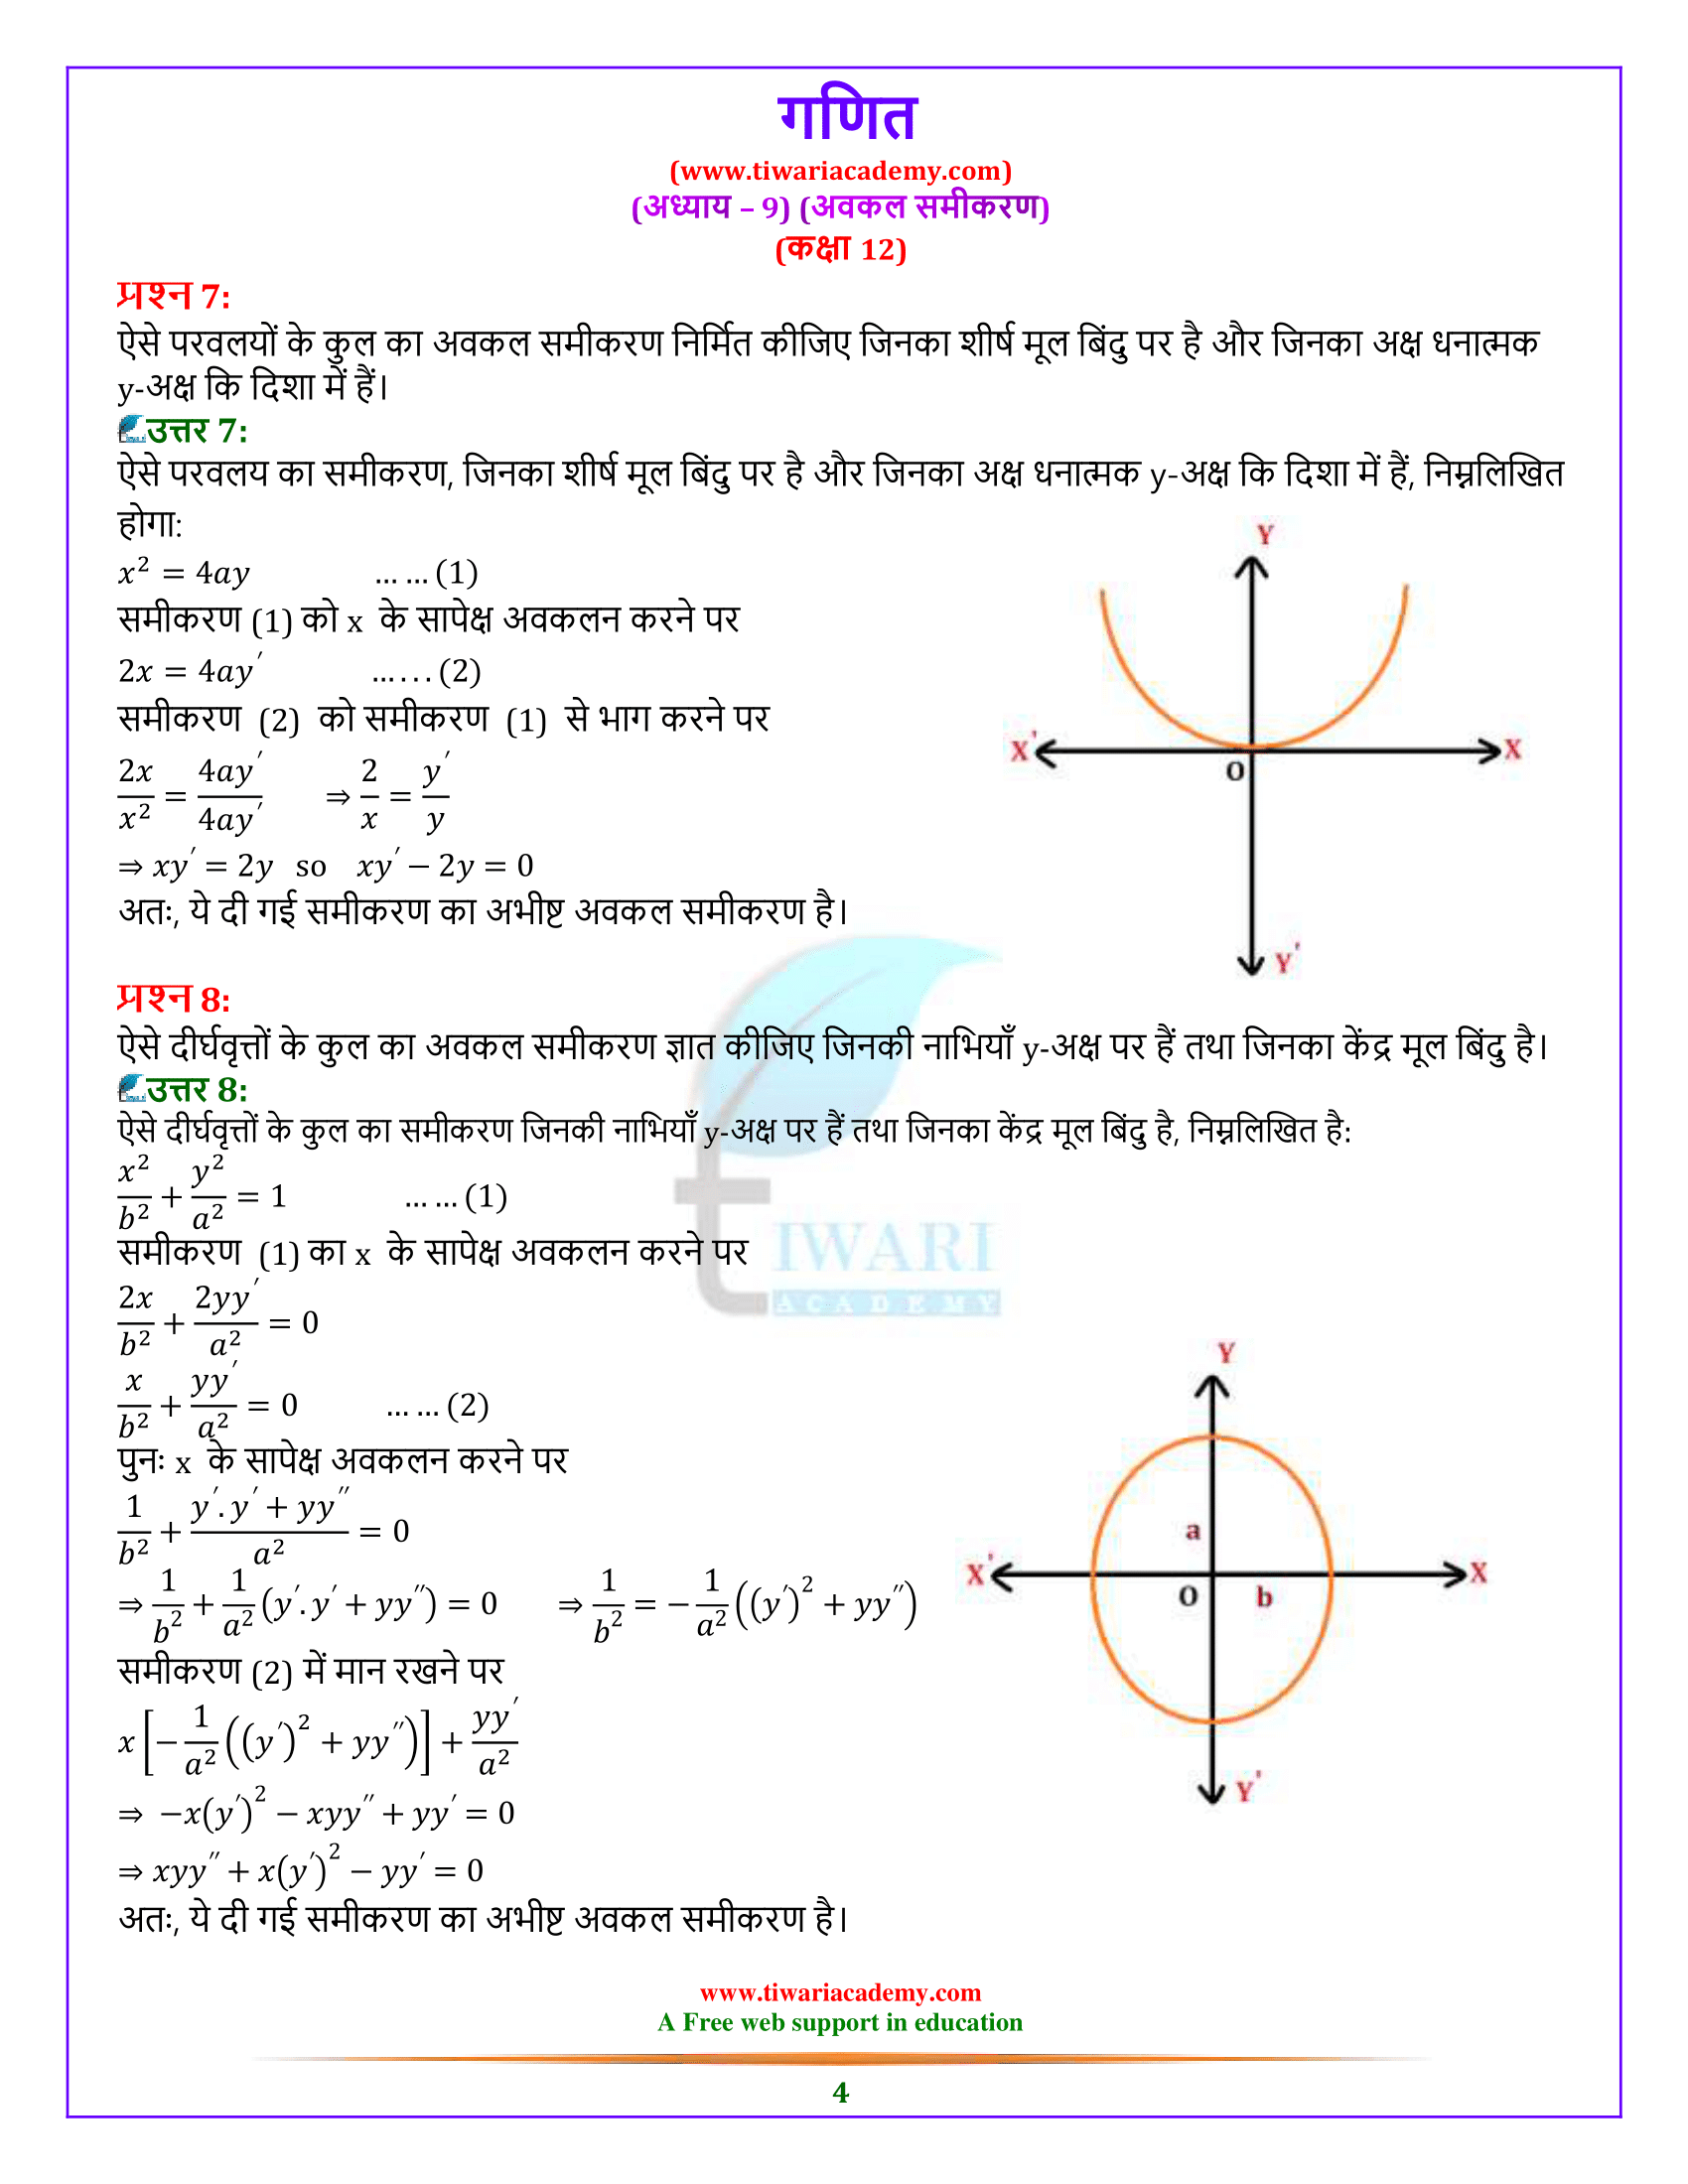 Class 12 Maths Exercise 9.3 Solutions in Hindi Medium for intermediate